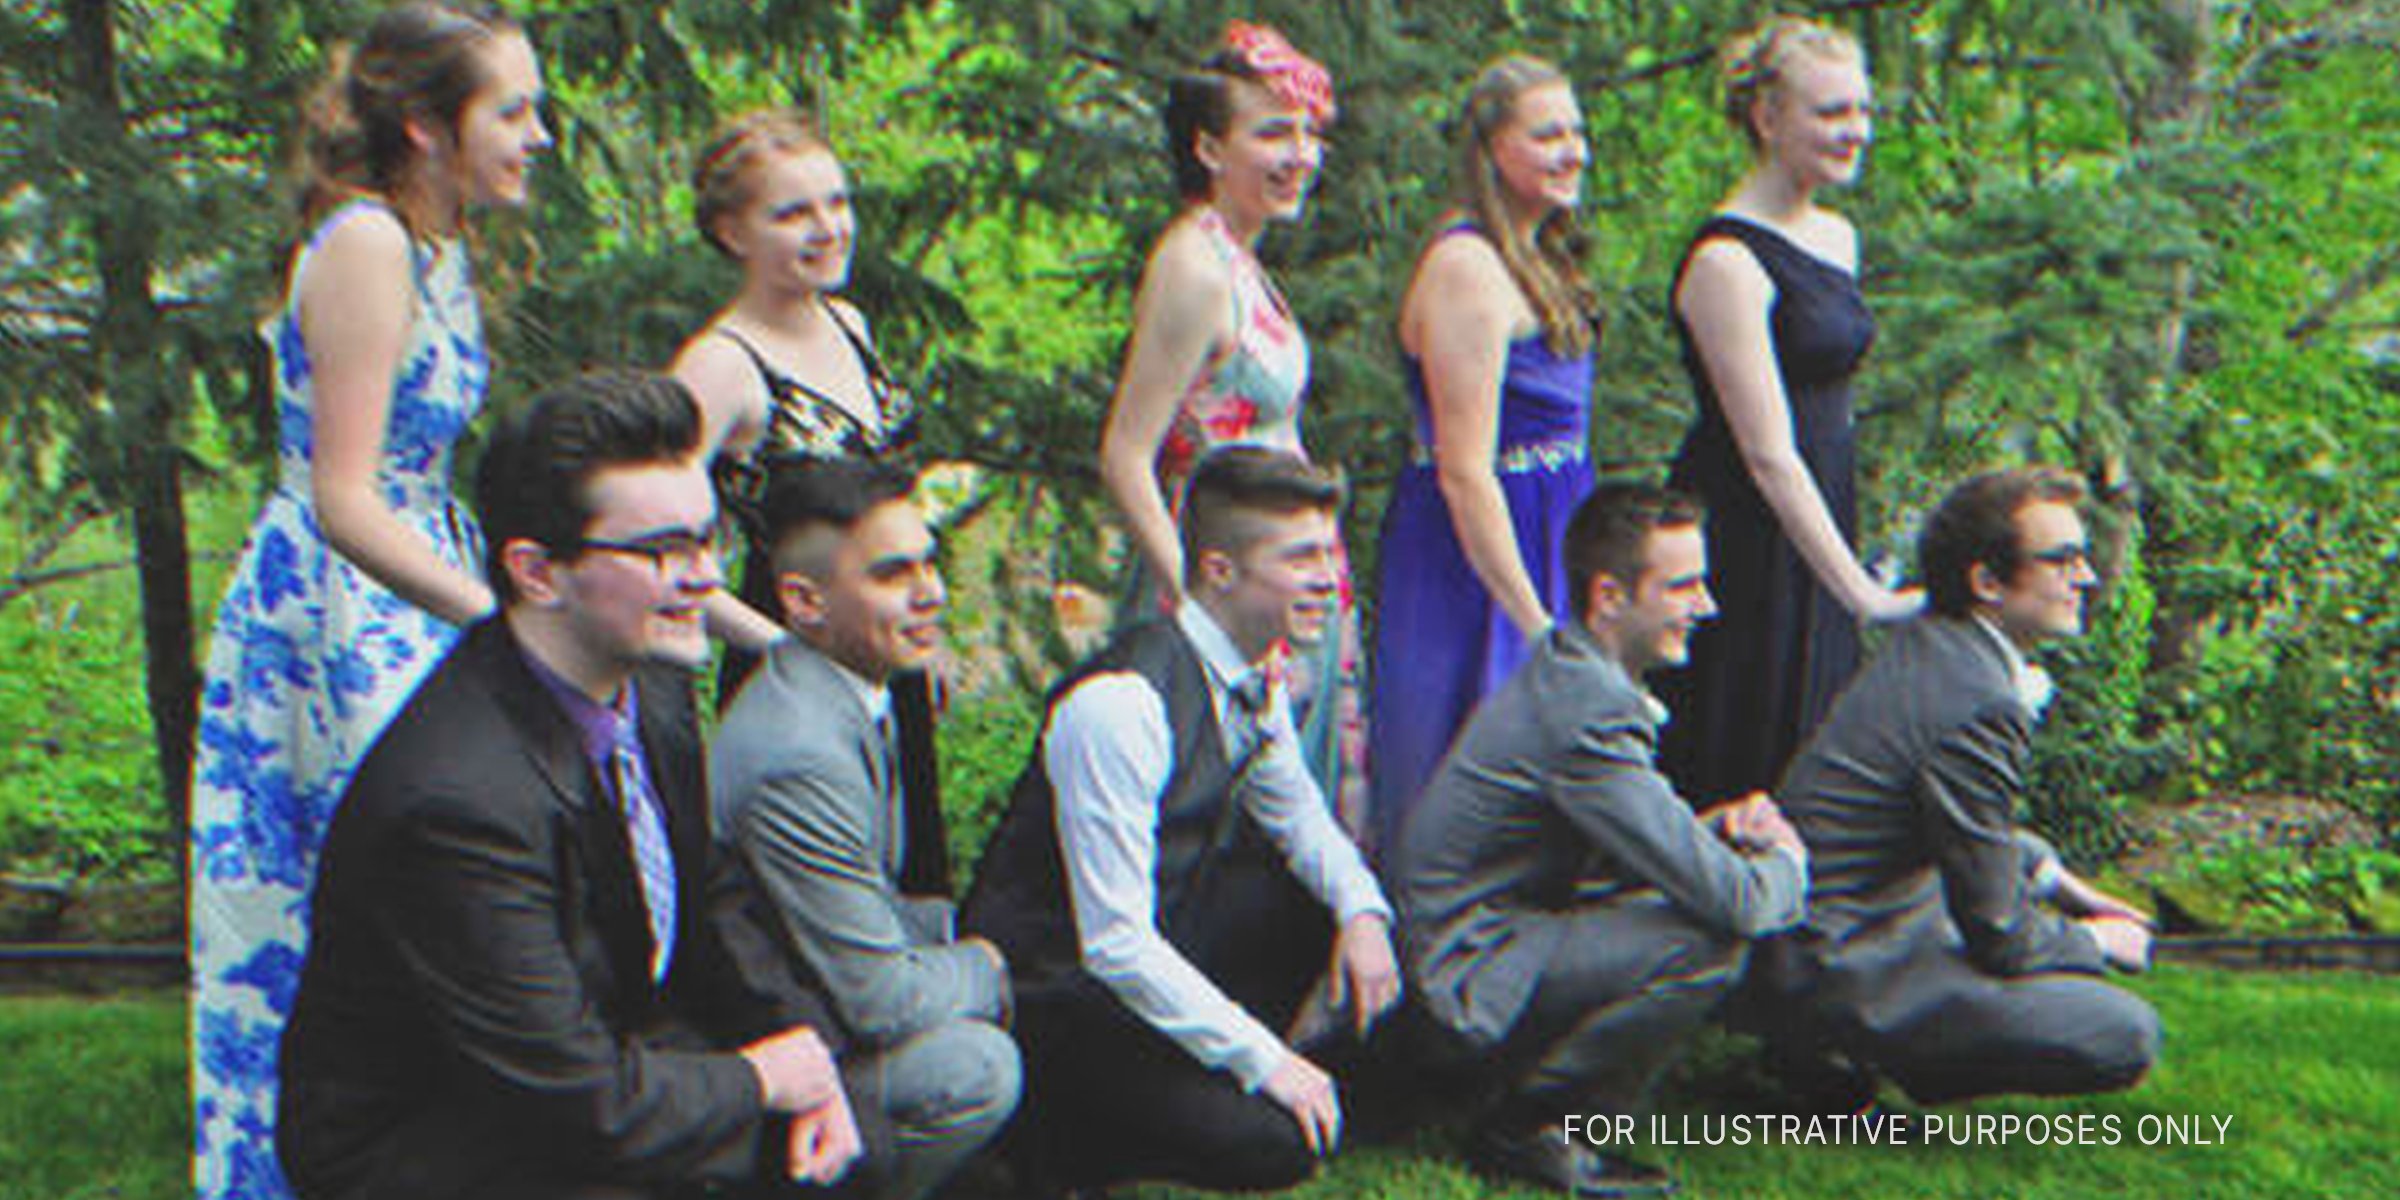 Teenage Kids Posing for a Picture Befor Prom | Source: Flickr / Seaners4real (CC BY-SA 2.0)